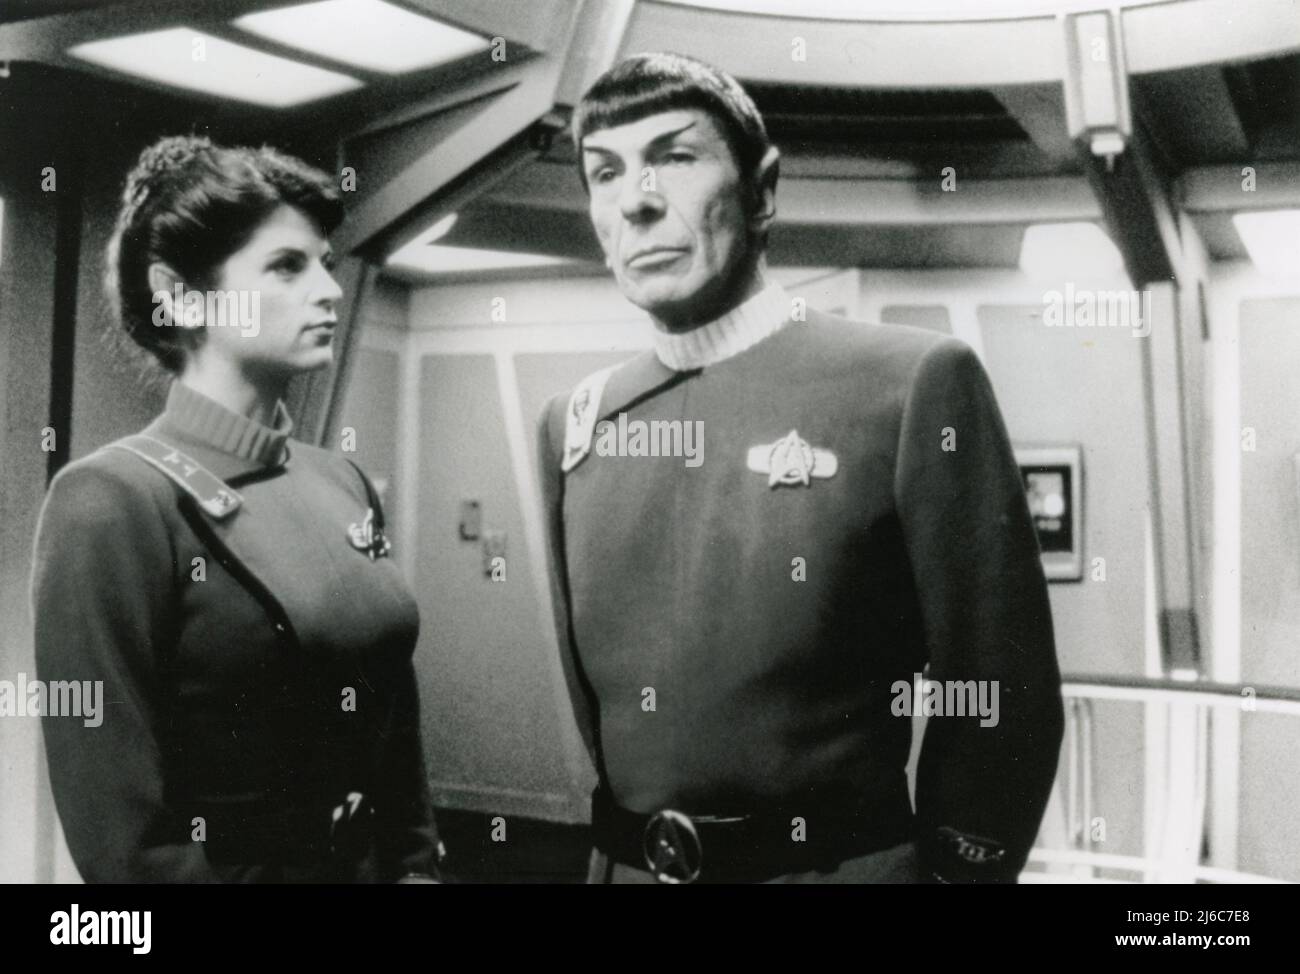 Actors Leonard Nimoy and actress Kristie Alley in the movie Star Trek II - The Wrath of Khan, USA 1982 Stock Photo